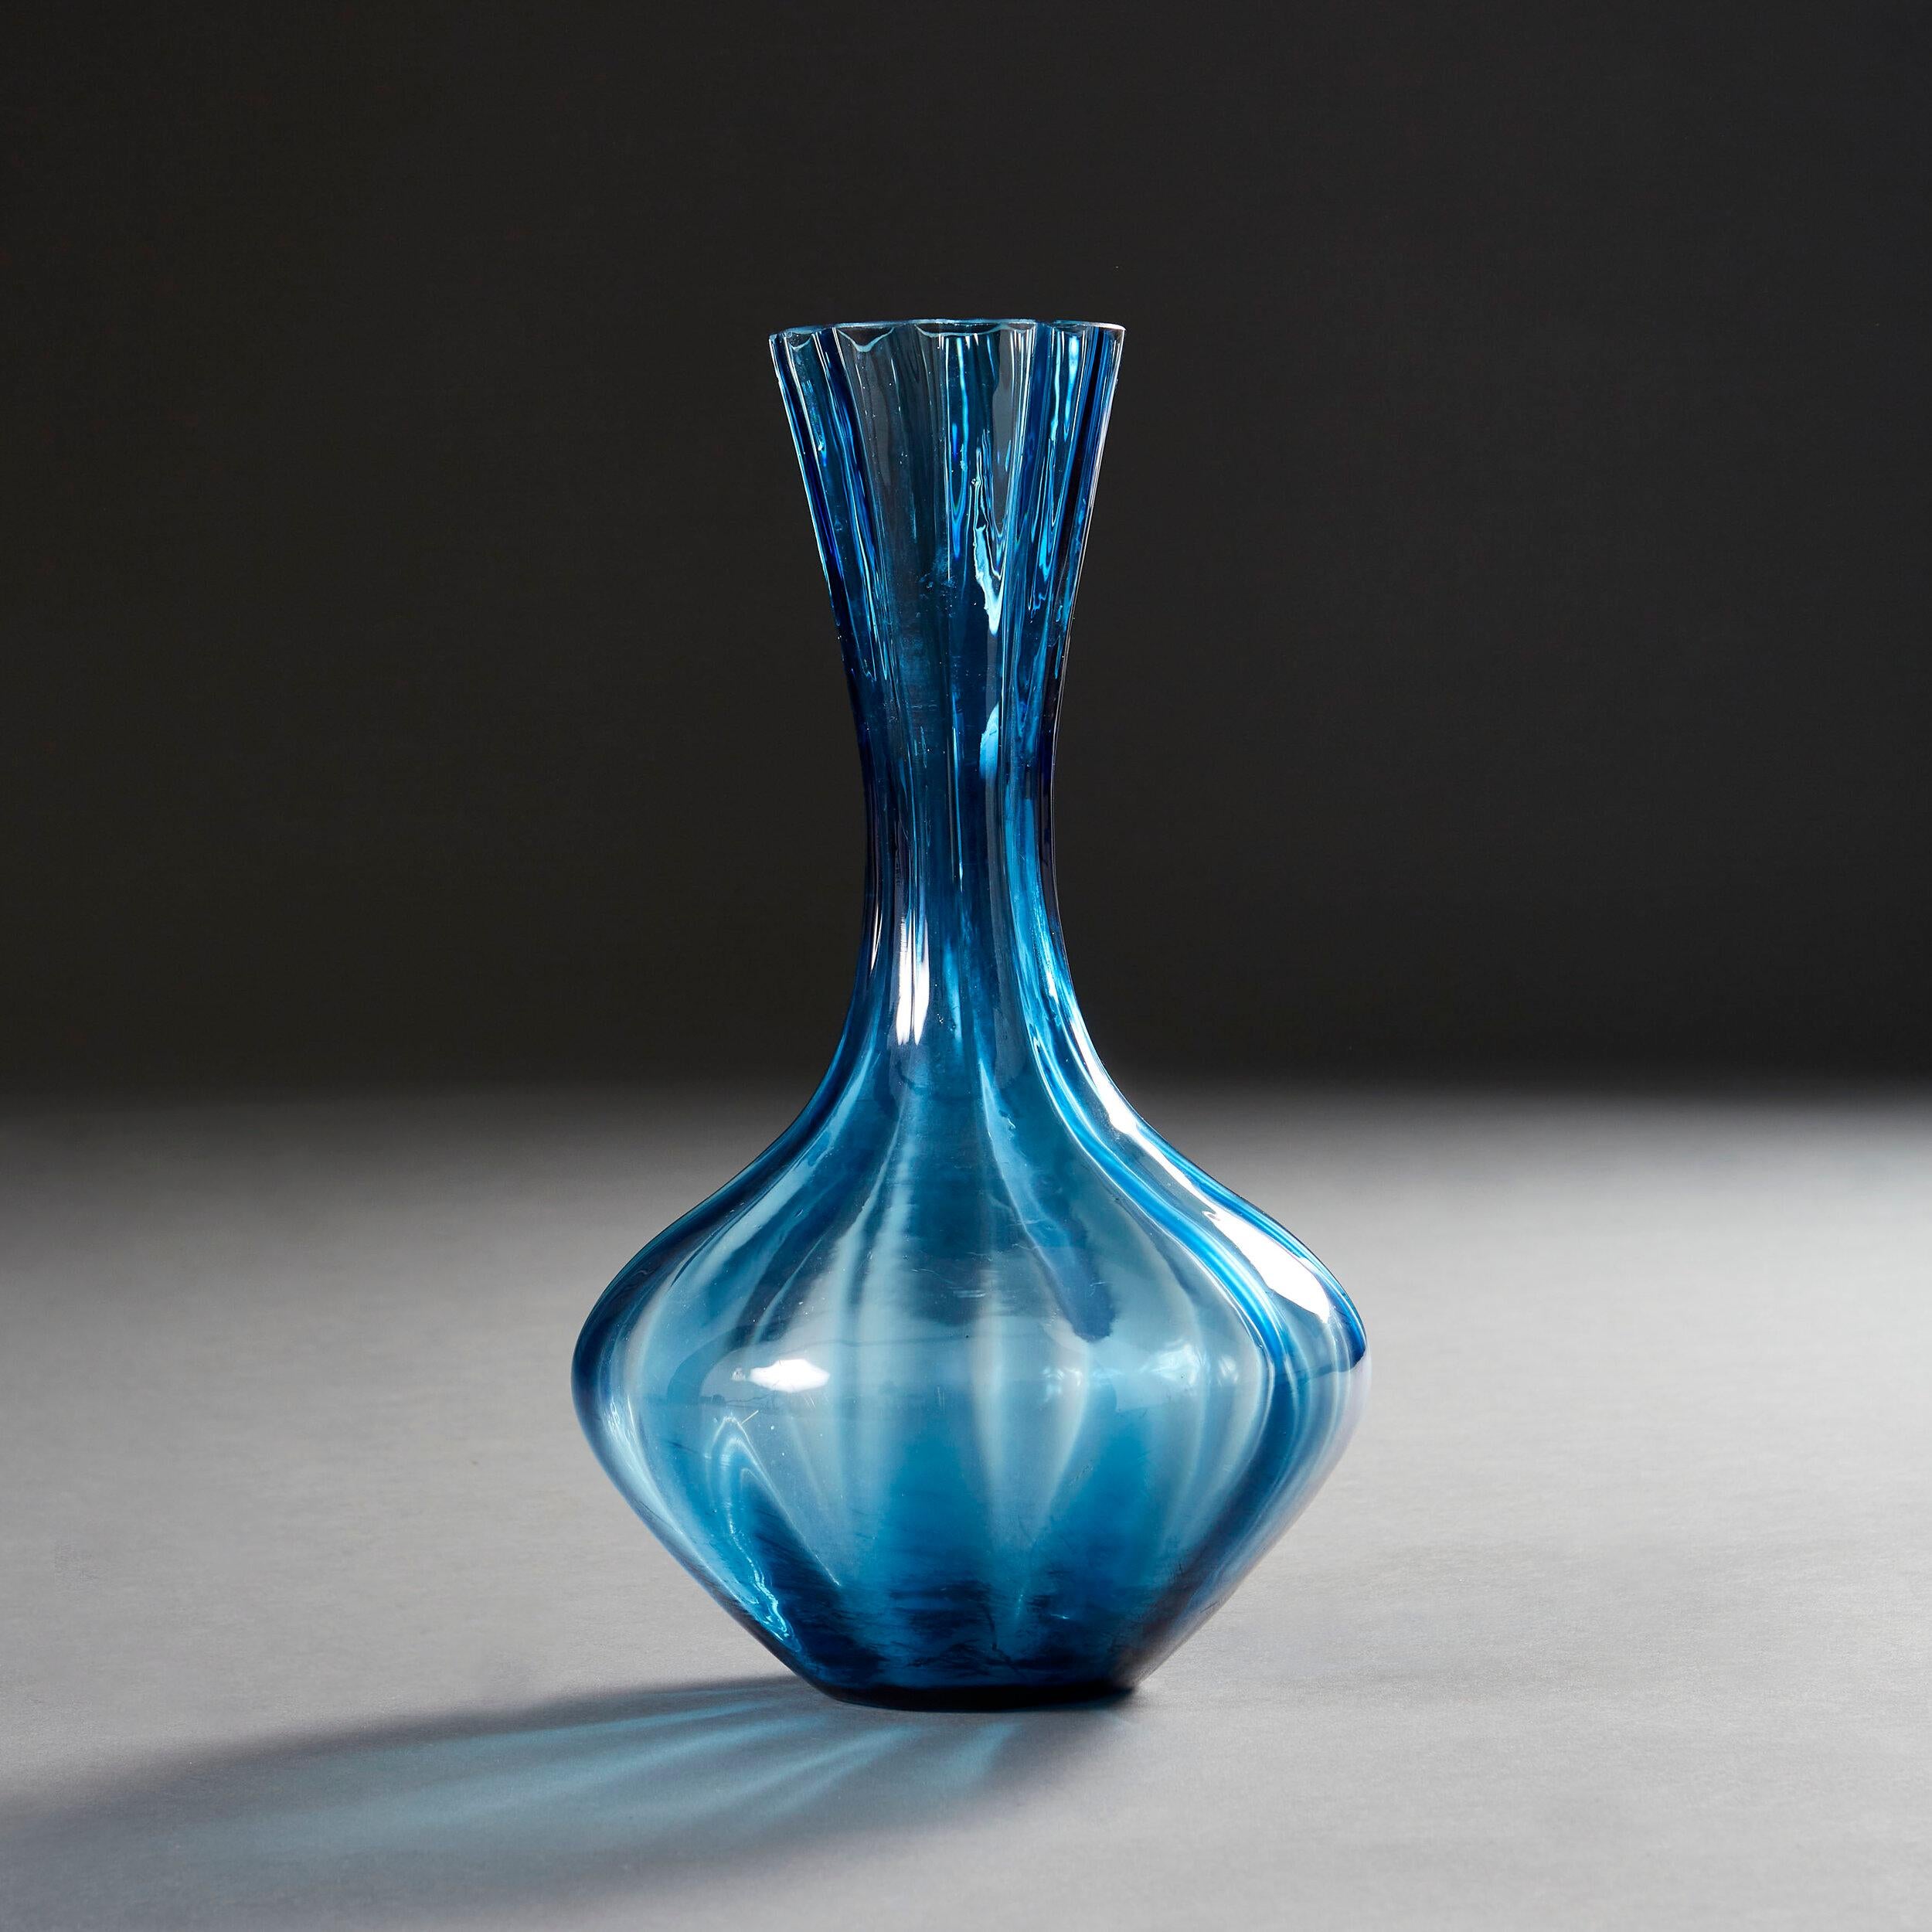 A mid-twentieth century blue glass vase with twisted stem, now as a lamp.

Please note that the lampshade is not included, and that the lamp is currently wired for the UK.